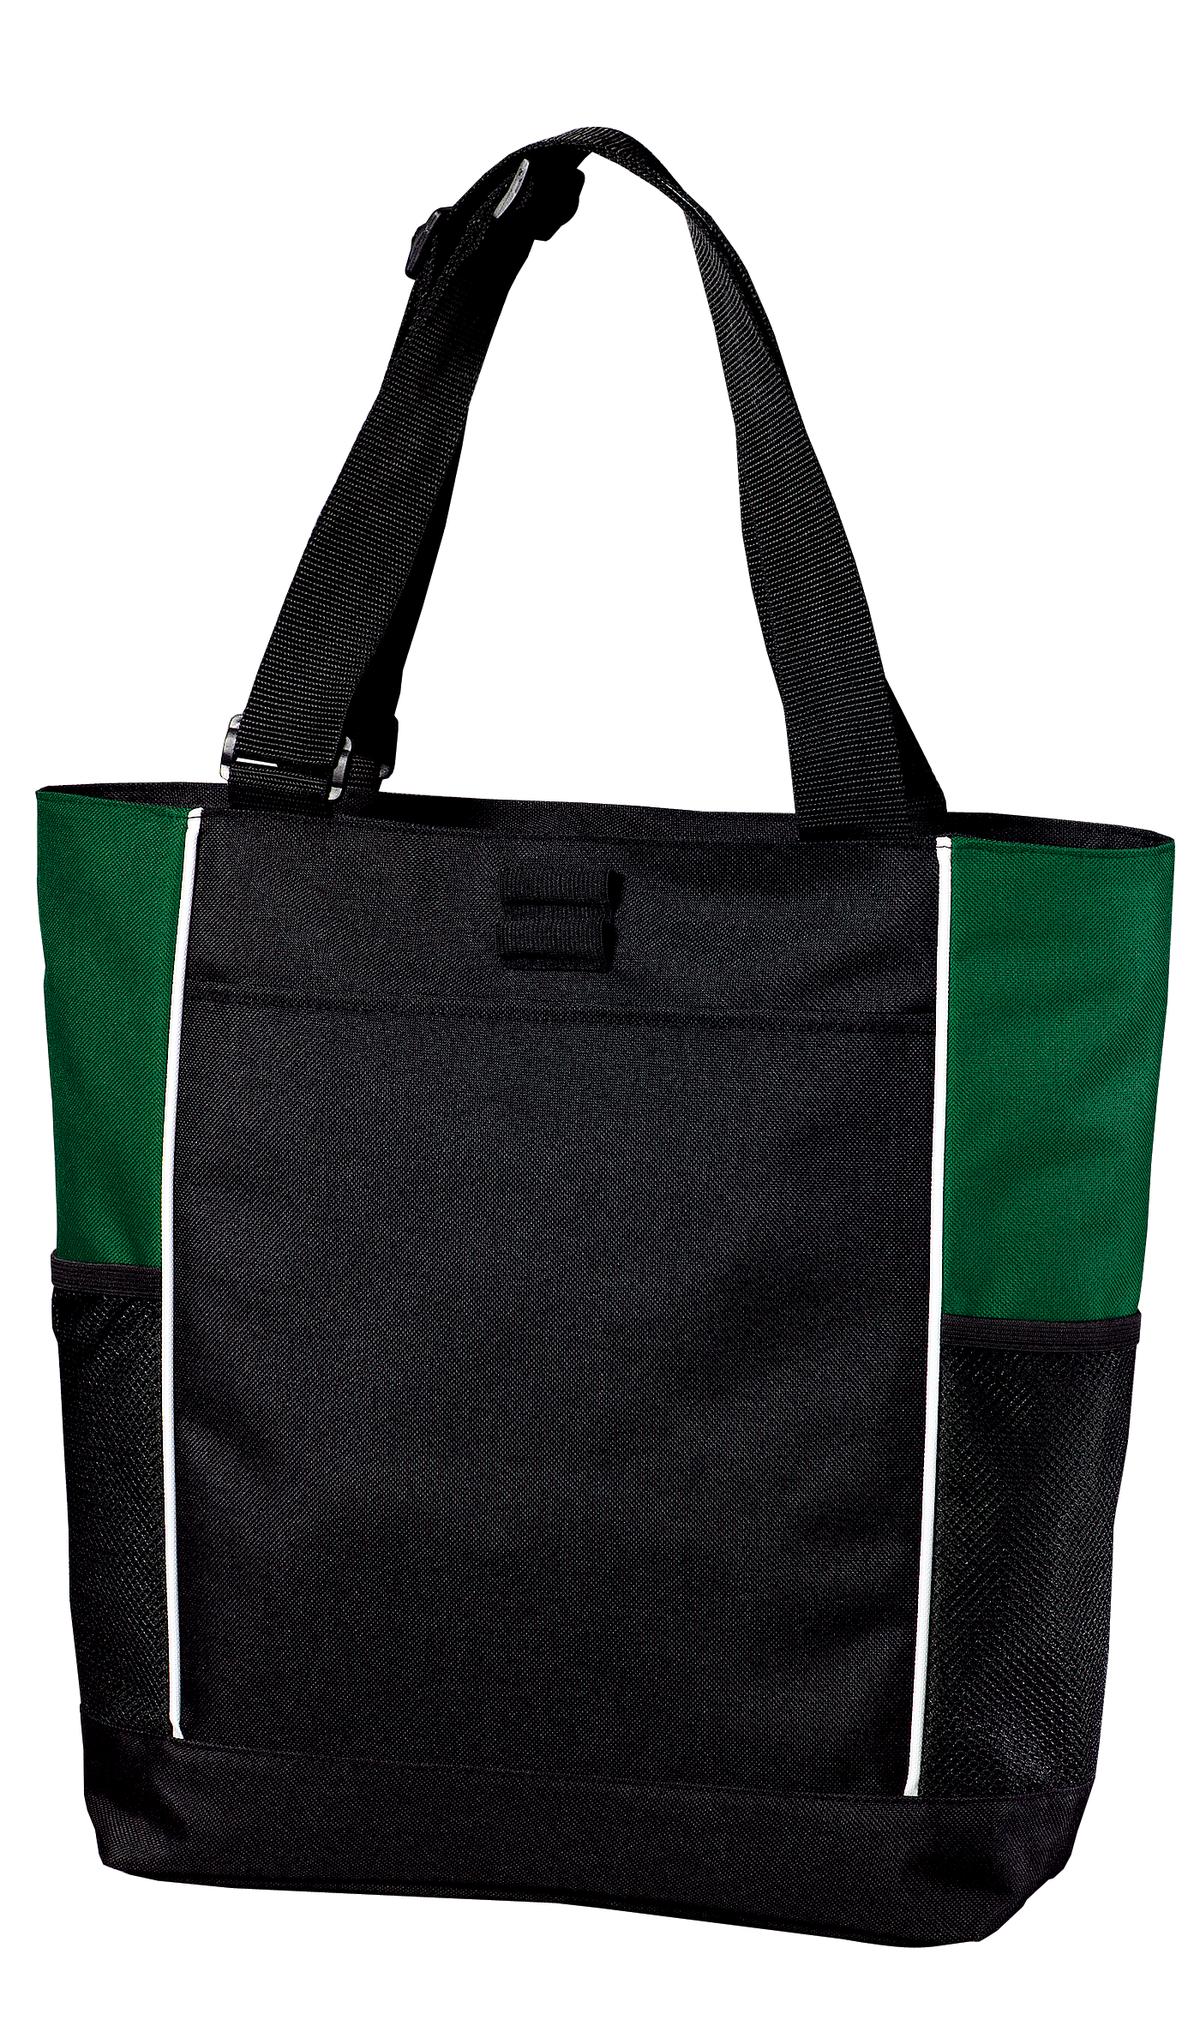 Port Authority Hospitality Bags ® Panel Tote.-Port Authority